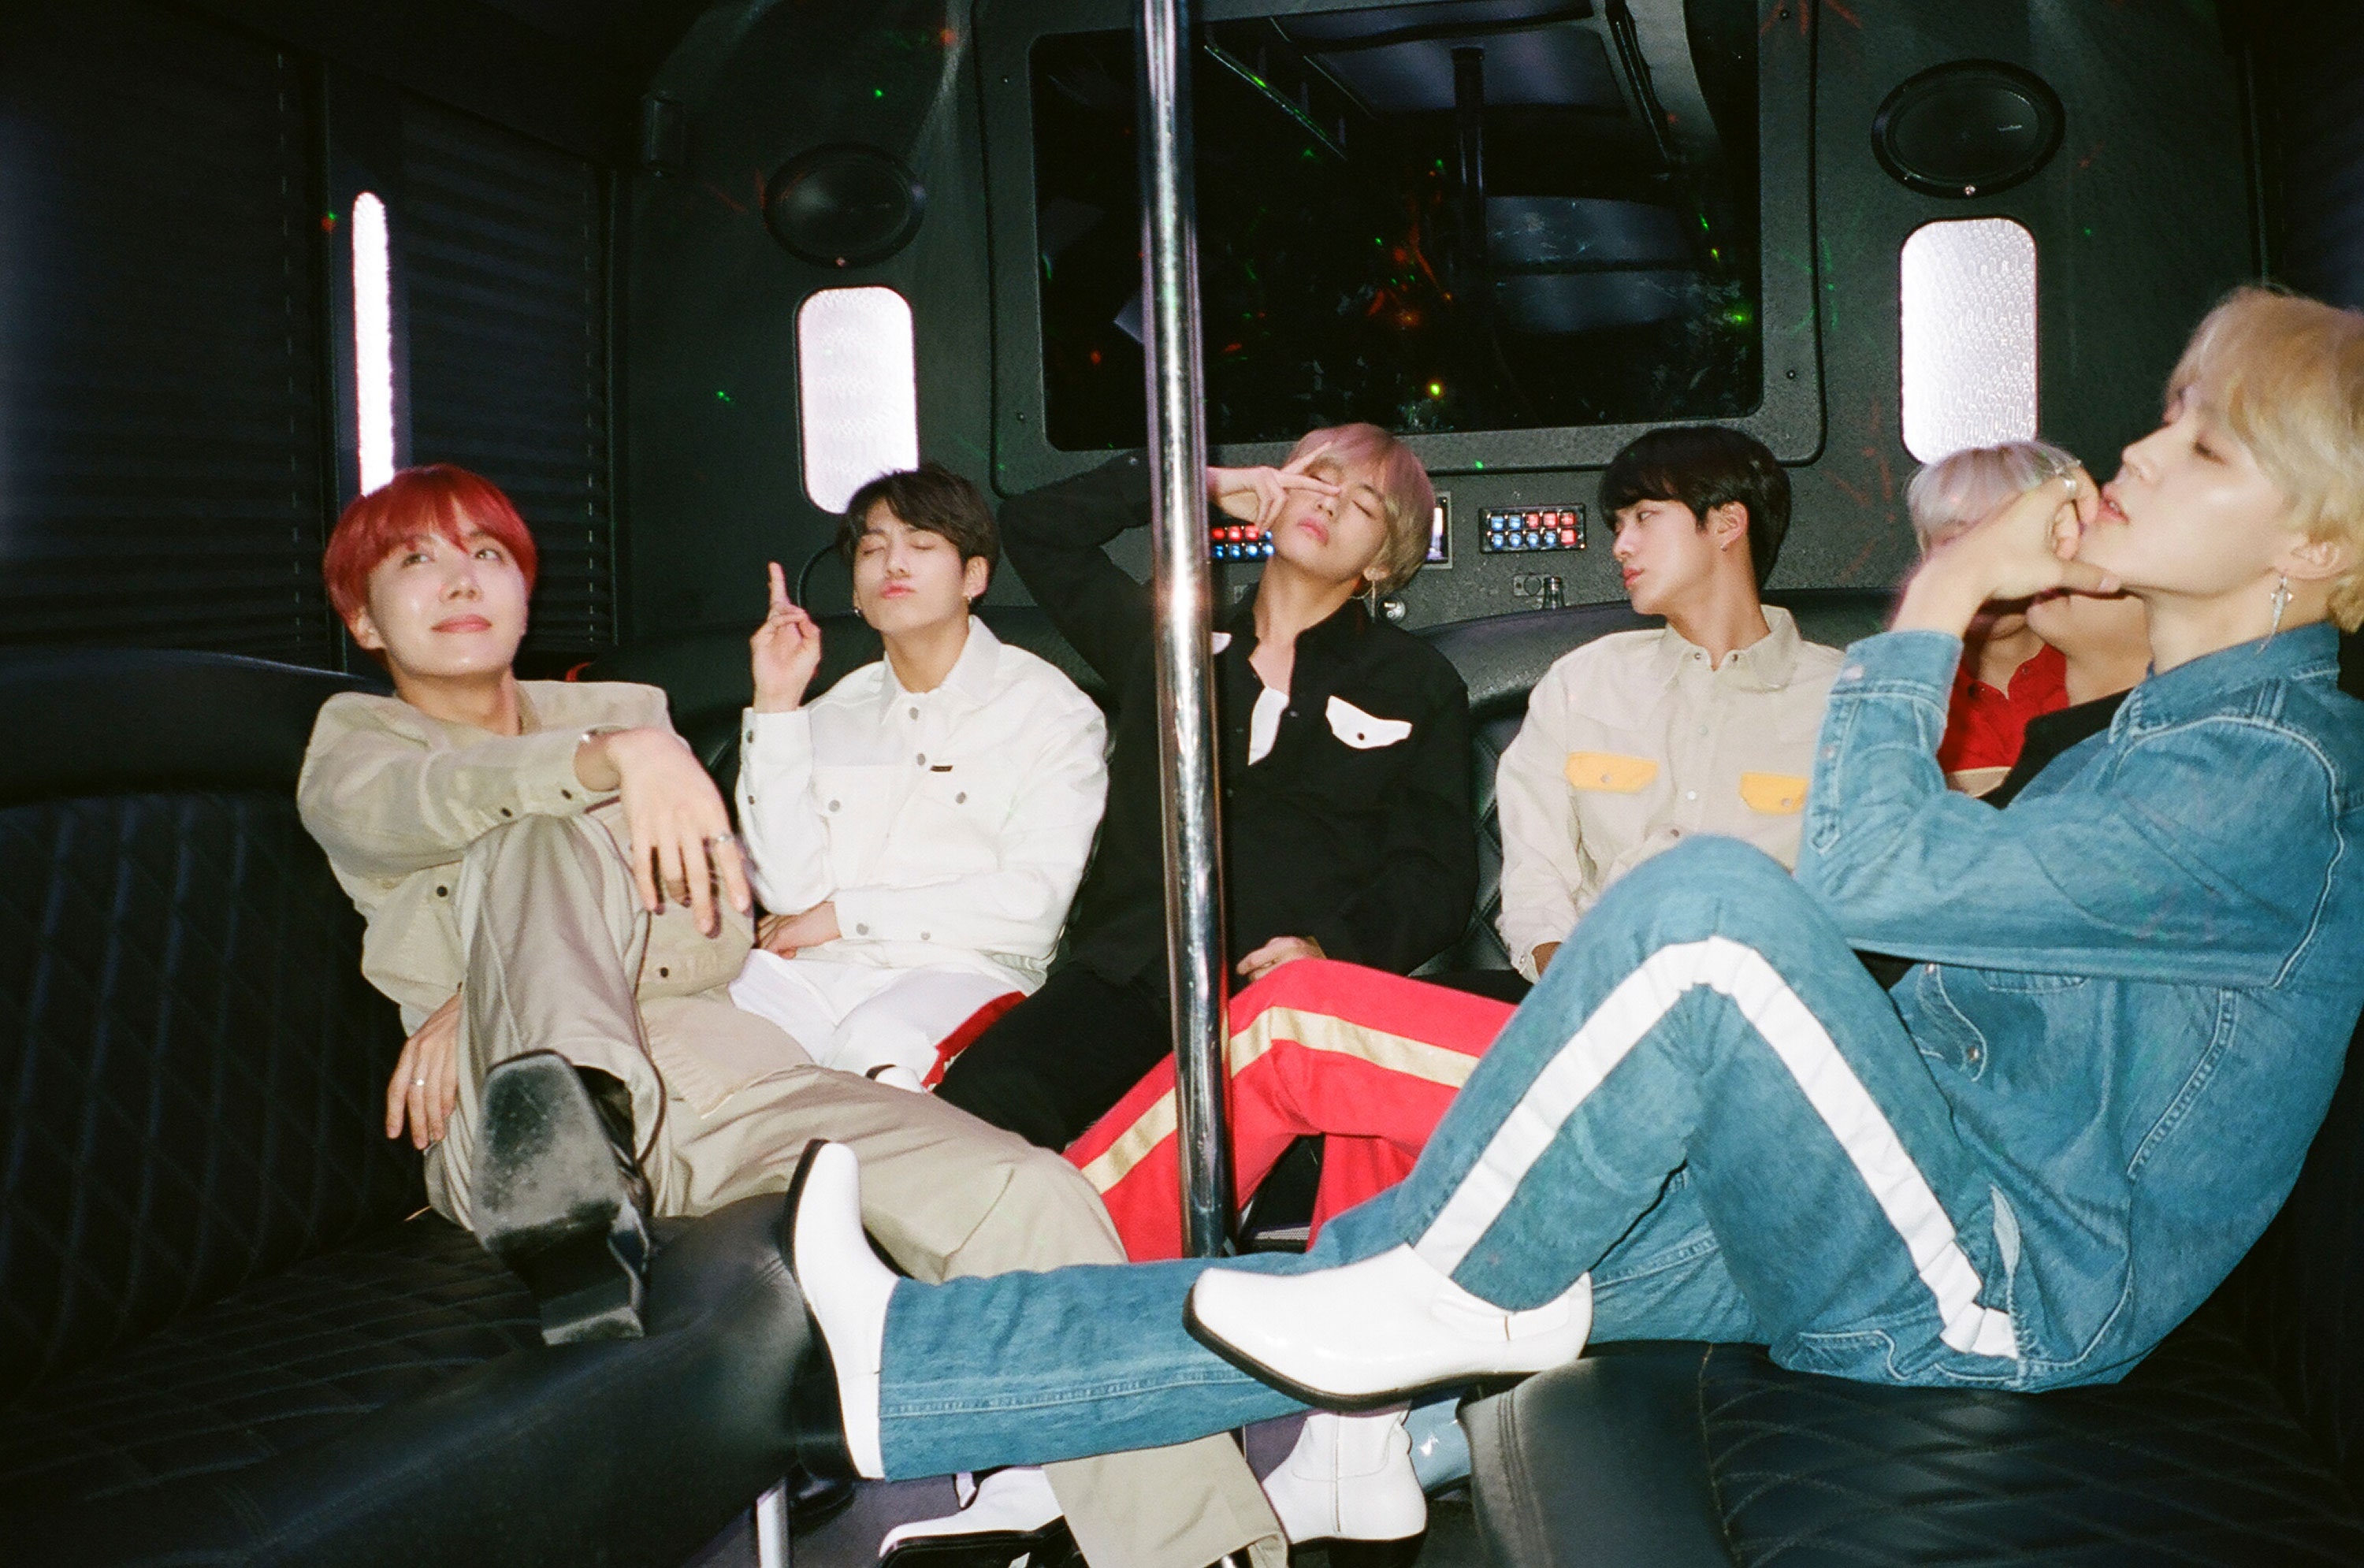 BTS Takes on L.A. With Vogue—And It's “Hella Lit”